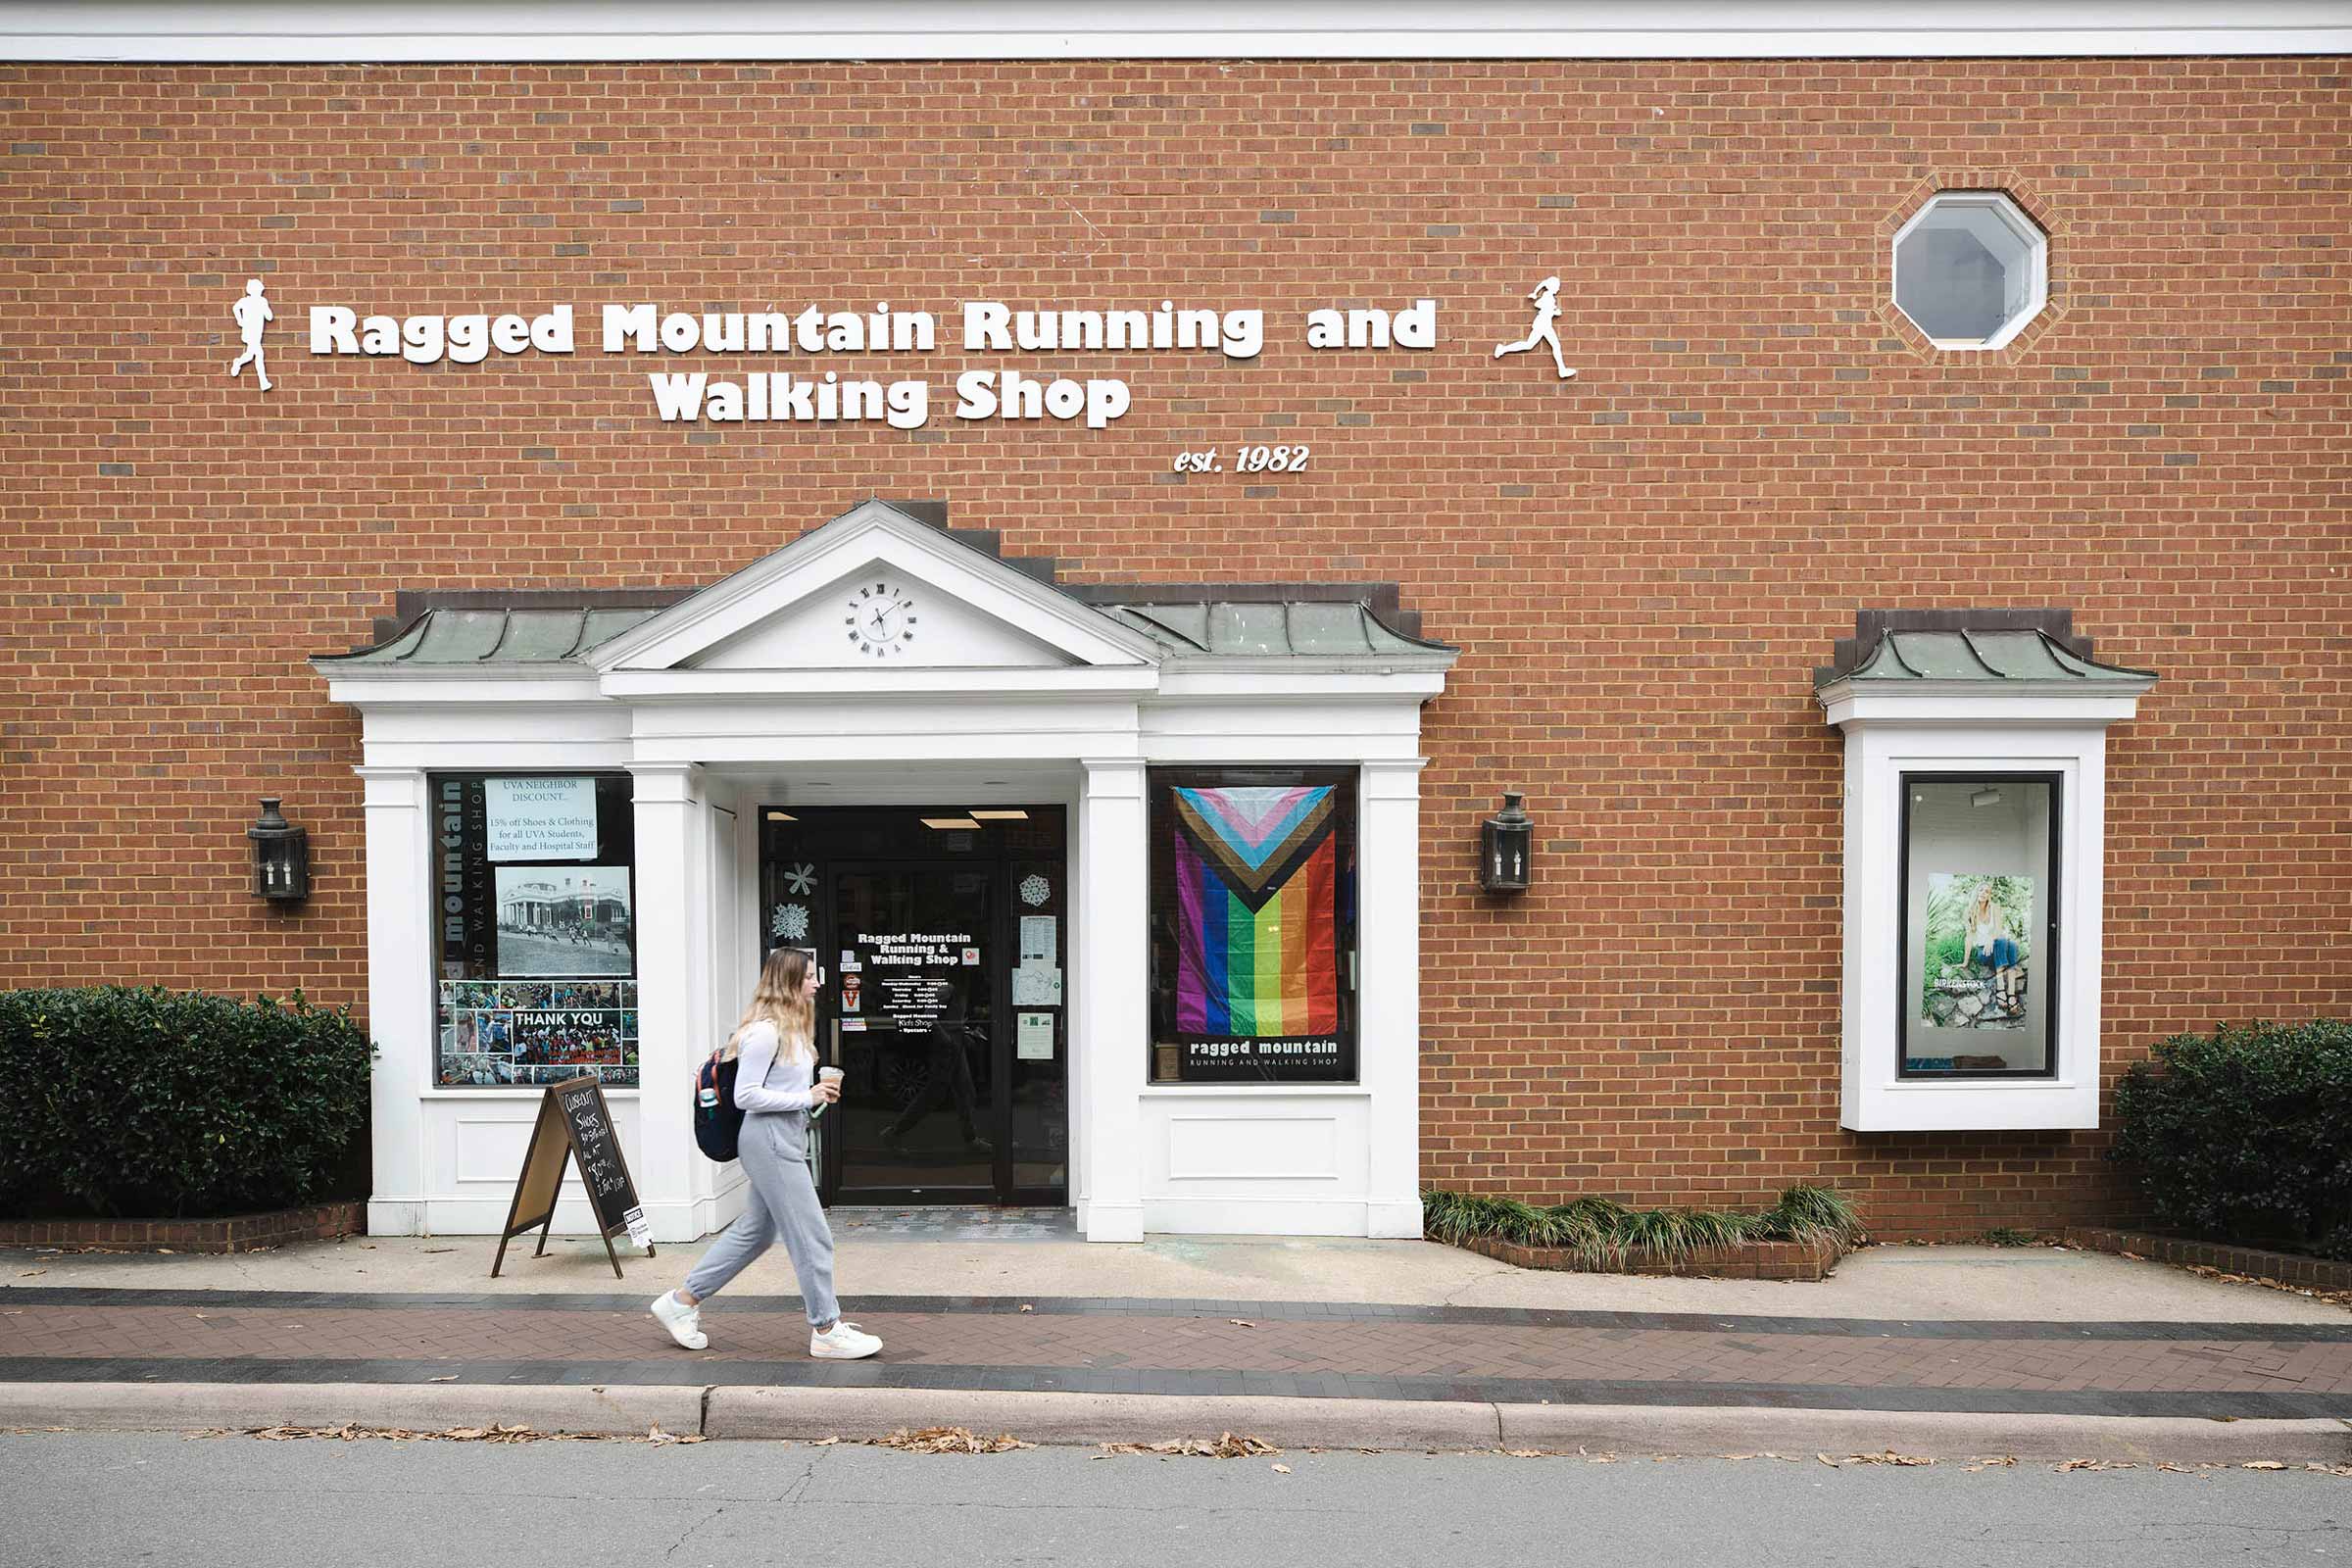 A woman walks past a storefront in a brick building with a sign reading 'Ragged Mountain Running and Walking Shop'